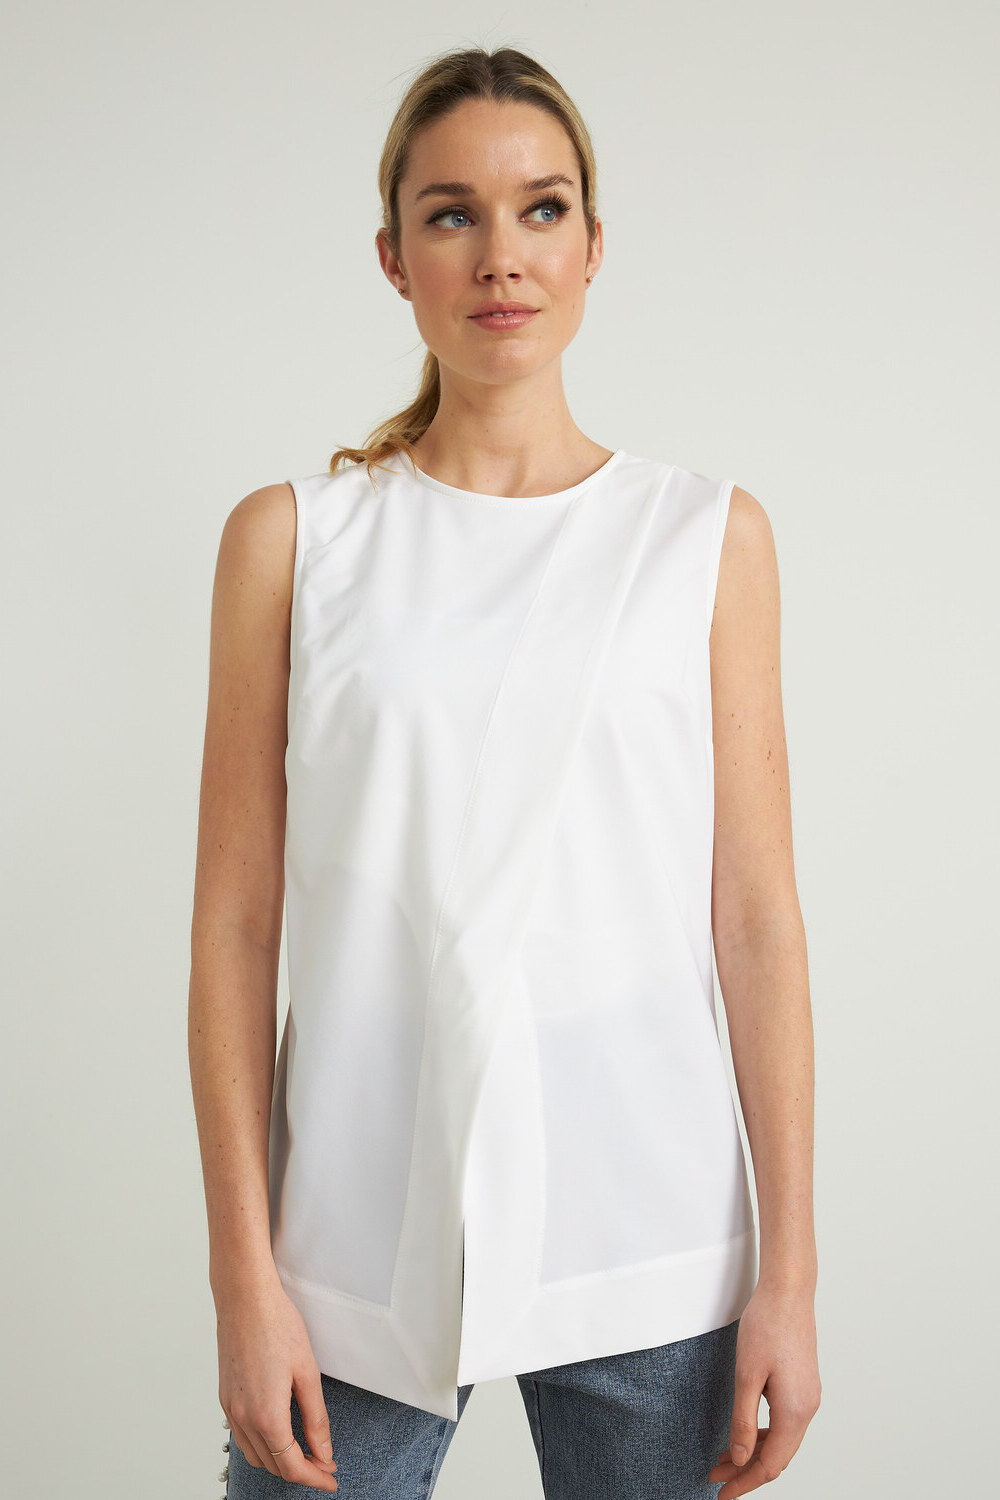 Joseph Ribkoff Pleated Front Top Style 212182. Optic White